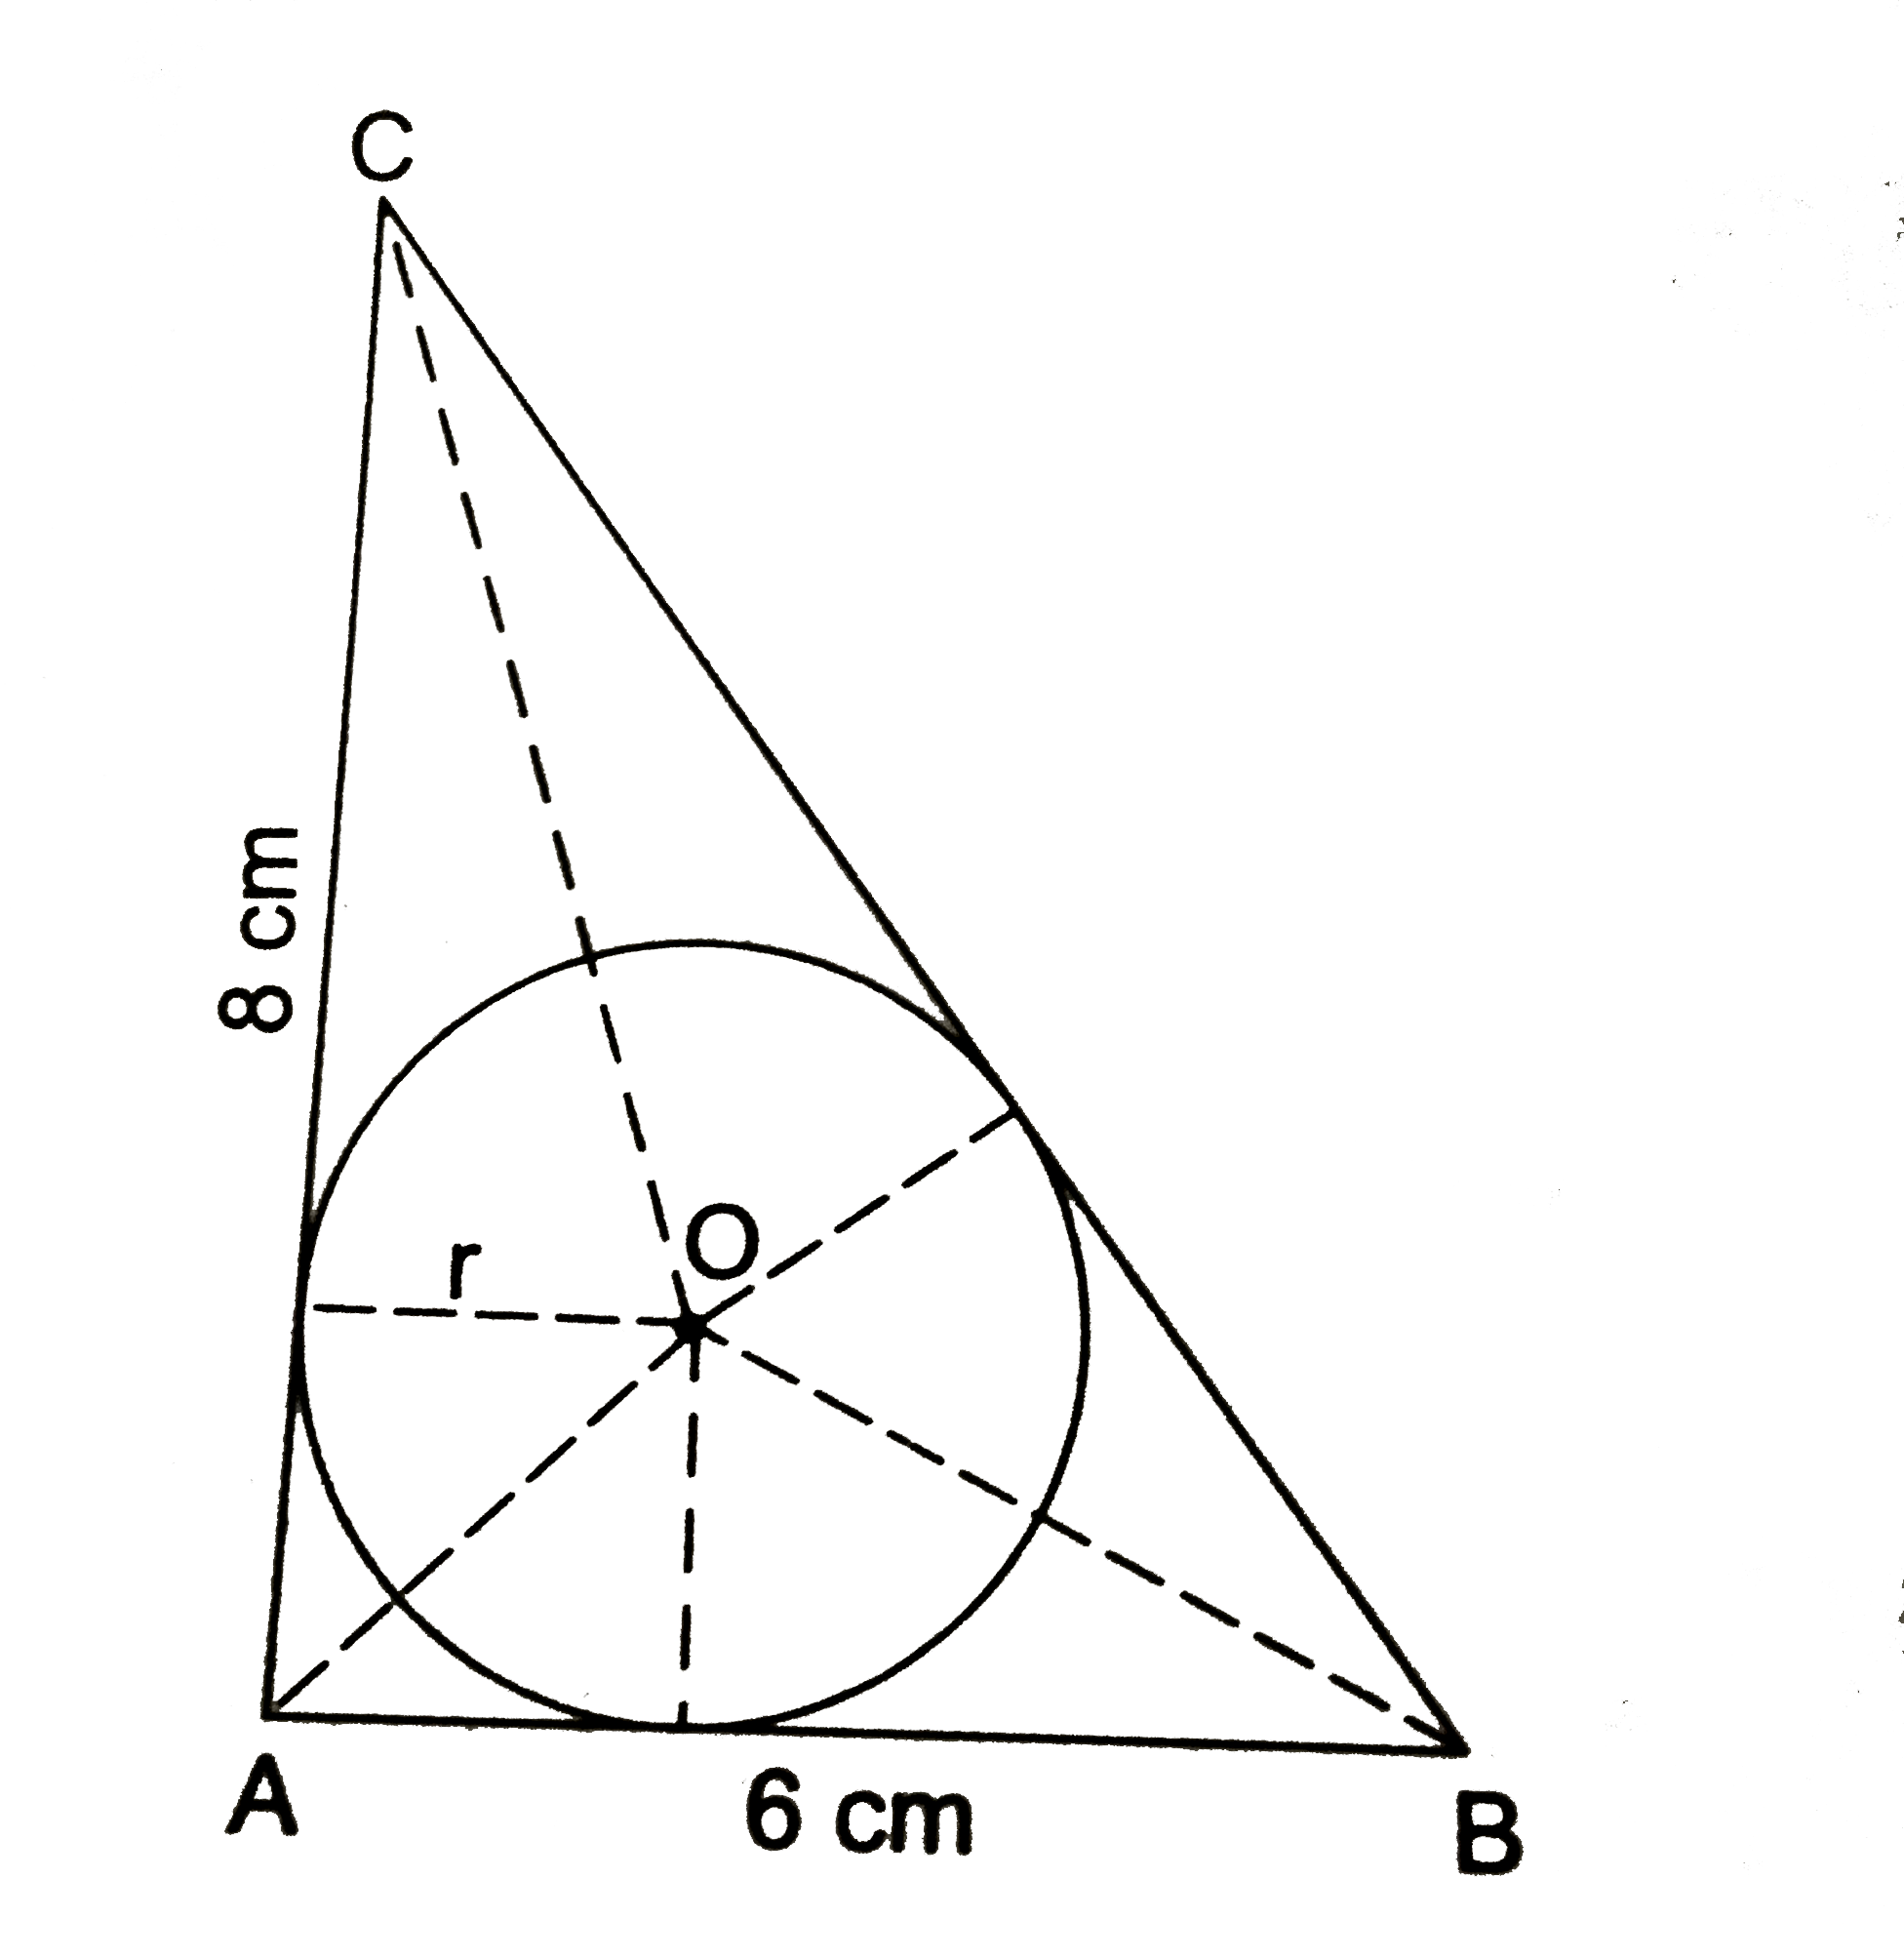 In The Given Figure Abc Is A Right Angled Triangle With Ab6 Cm And B 7582